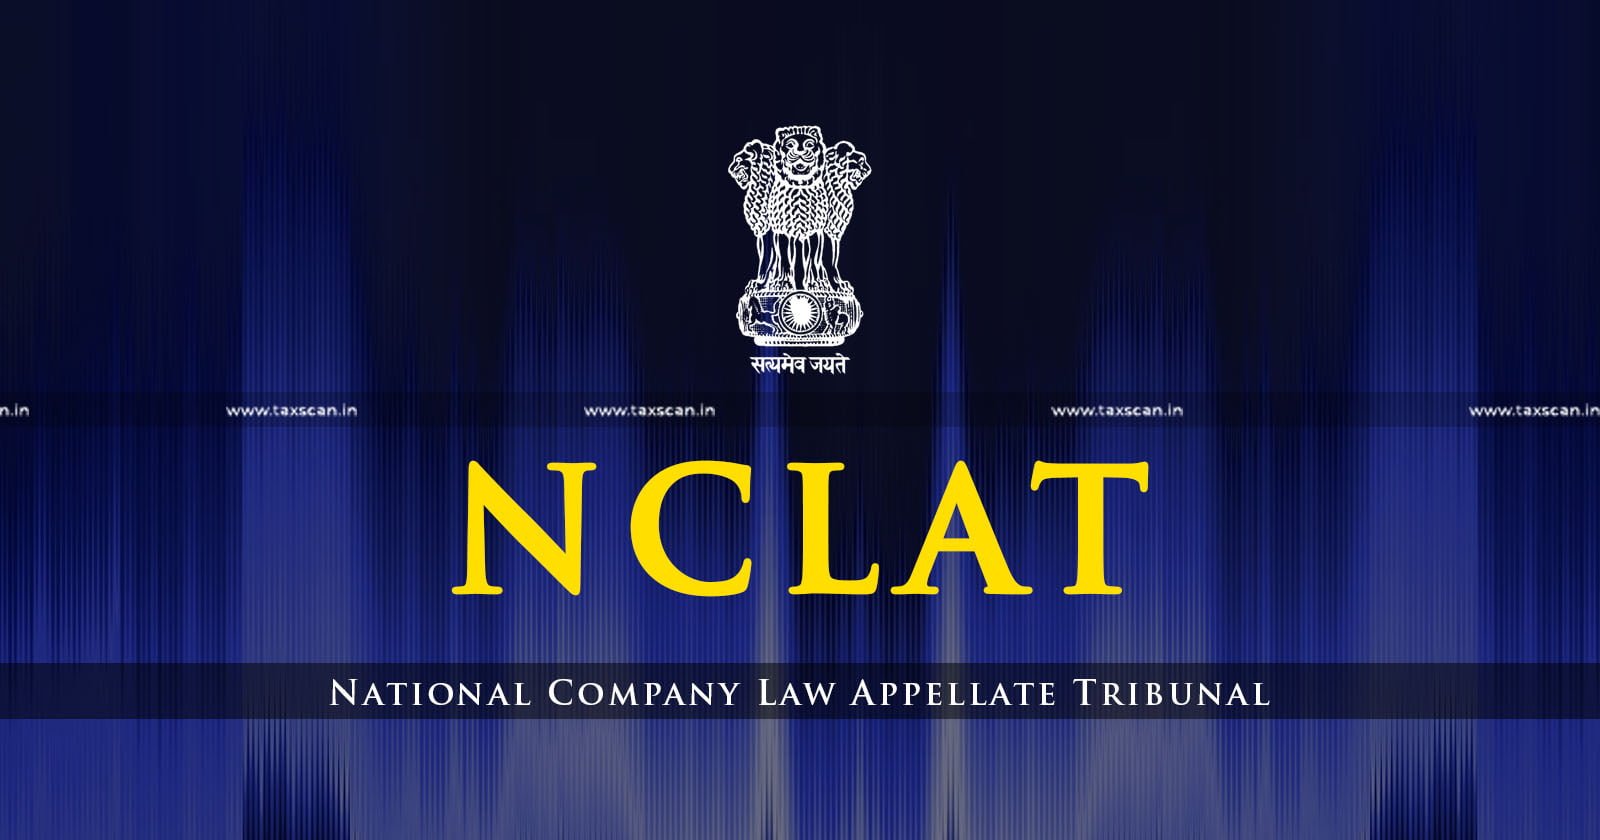 Name of Company - Struck of - Substantial movables - Immovable Assets - NCLAT - taxscan